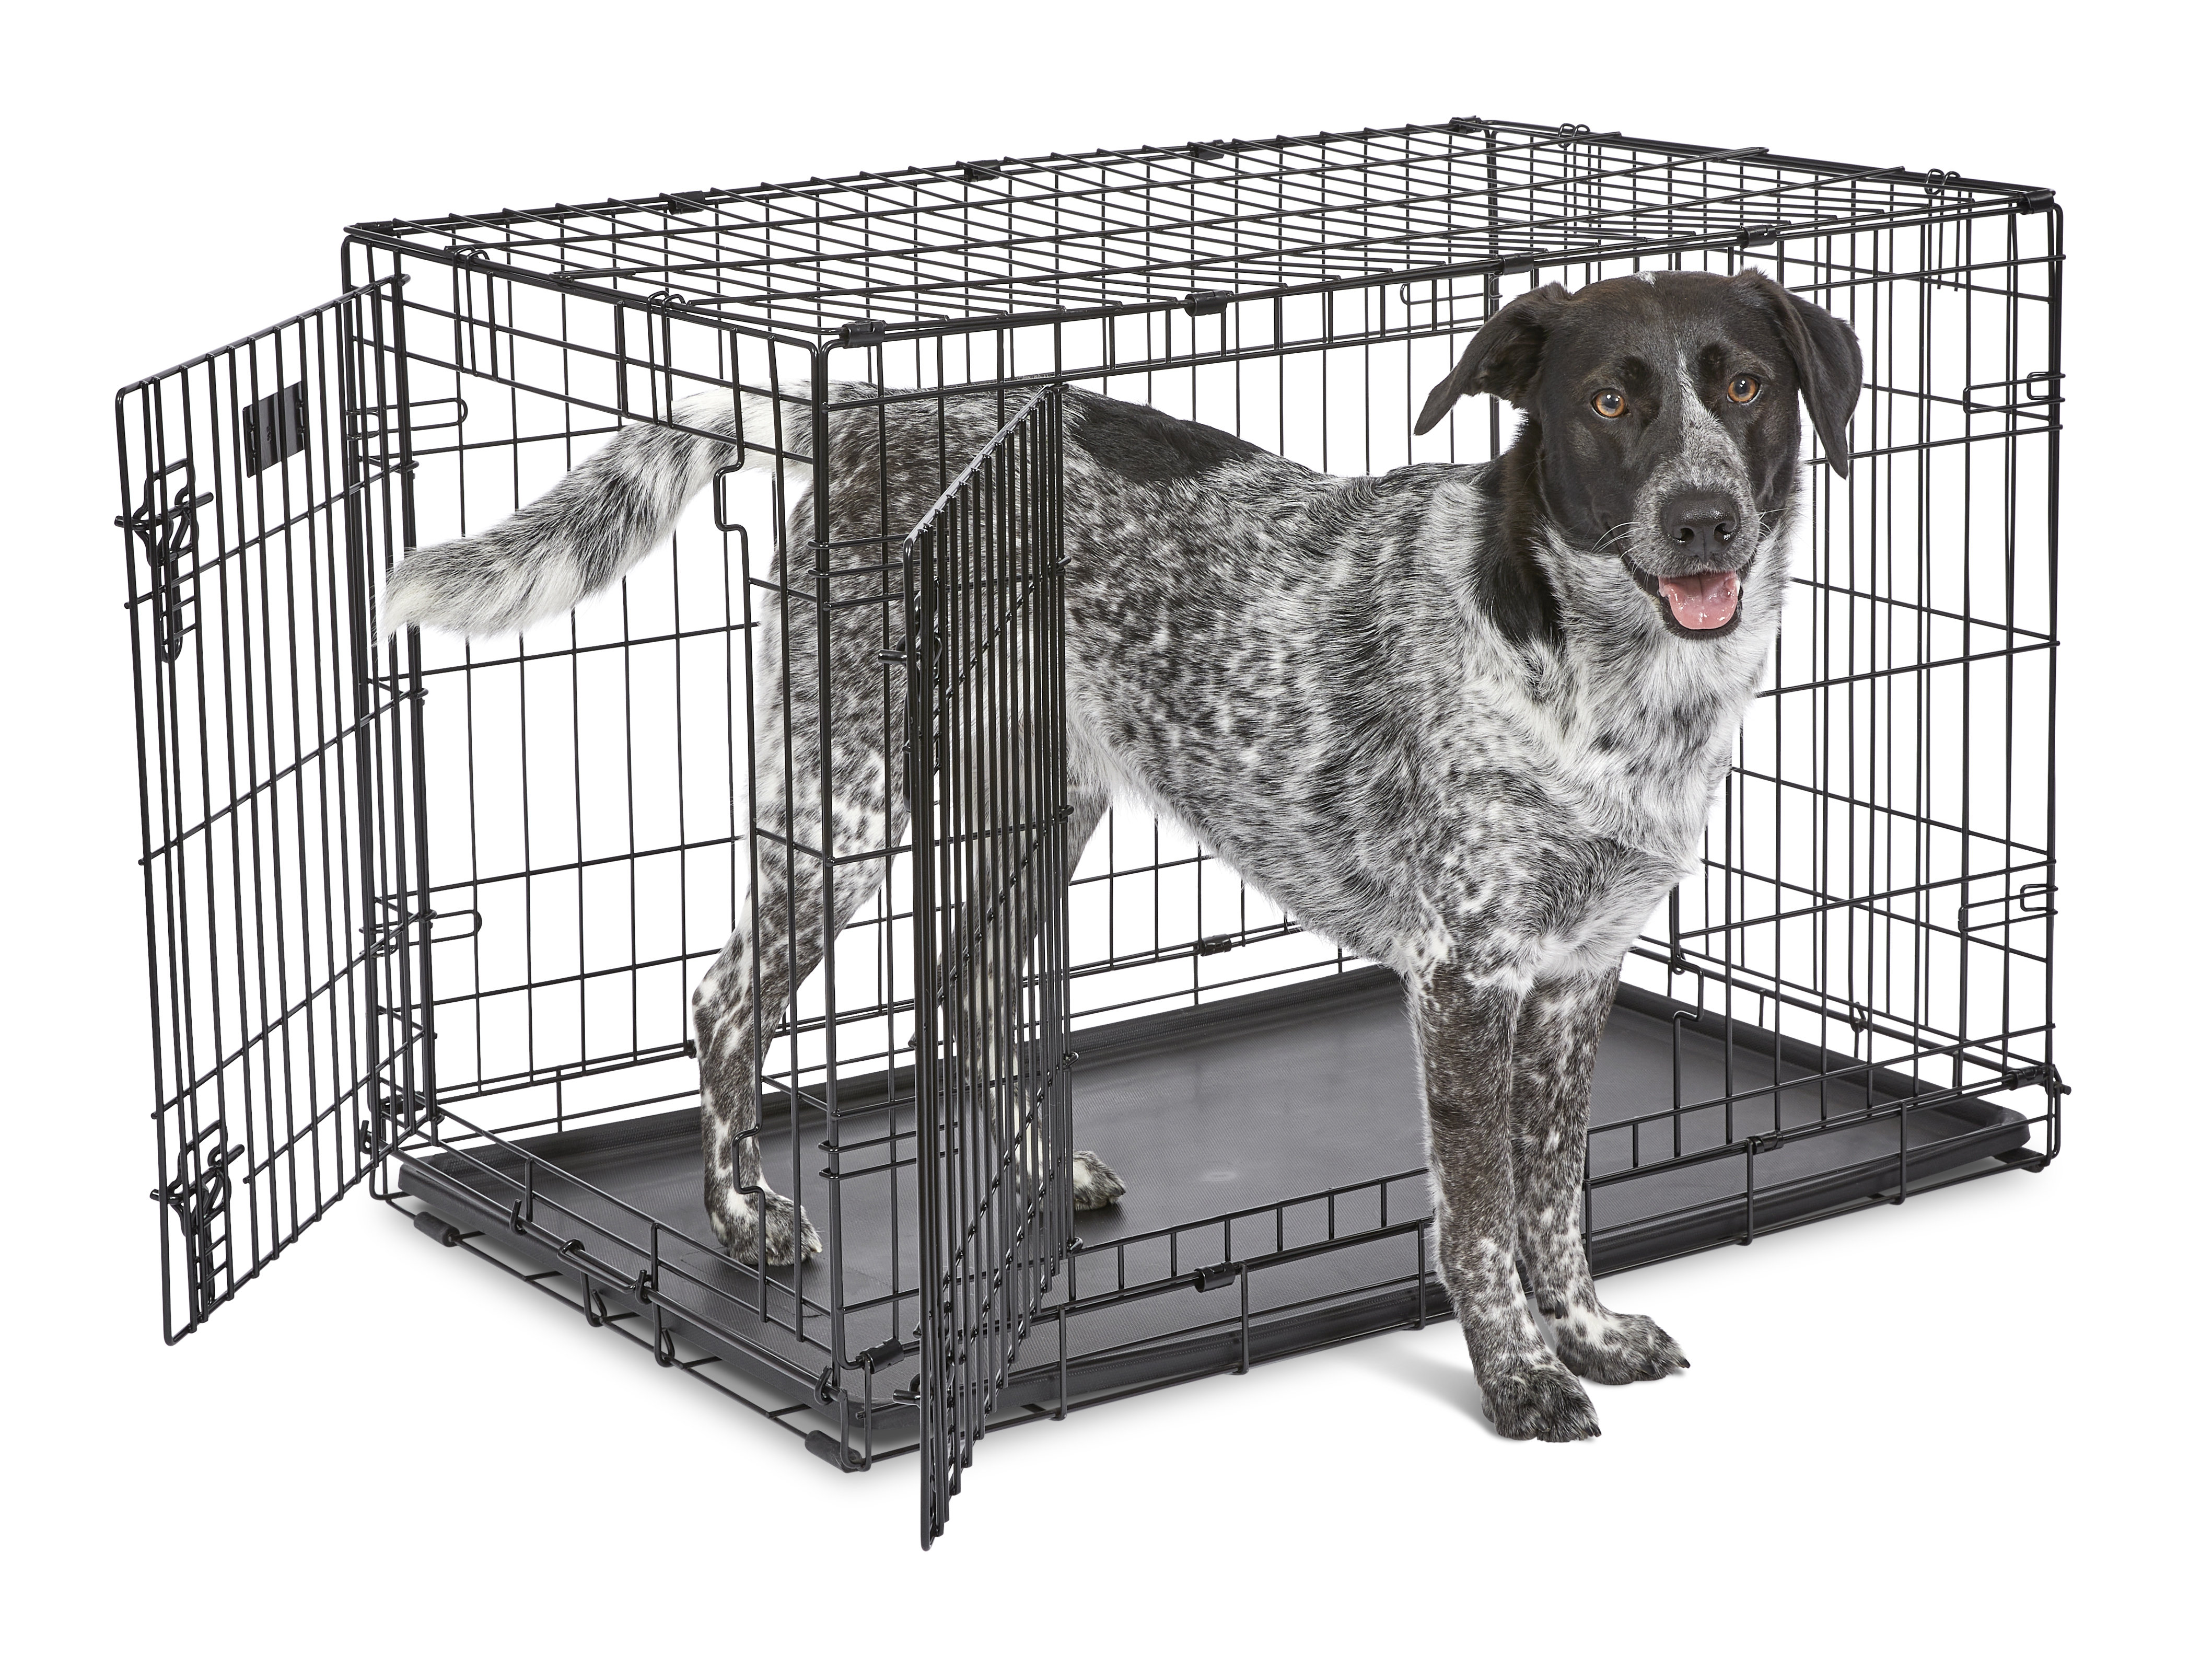 MidWest Newly Enhanced Folding Metal Toy Dog Crate with Divider